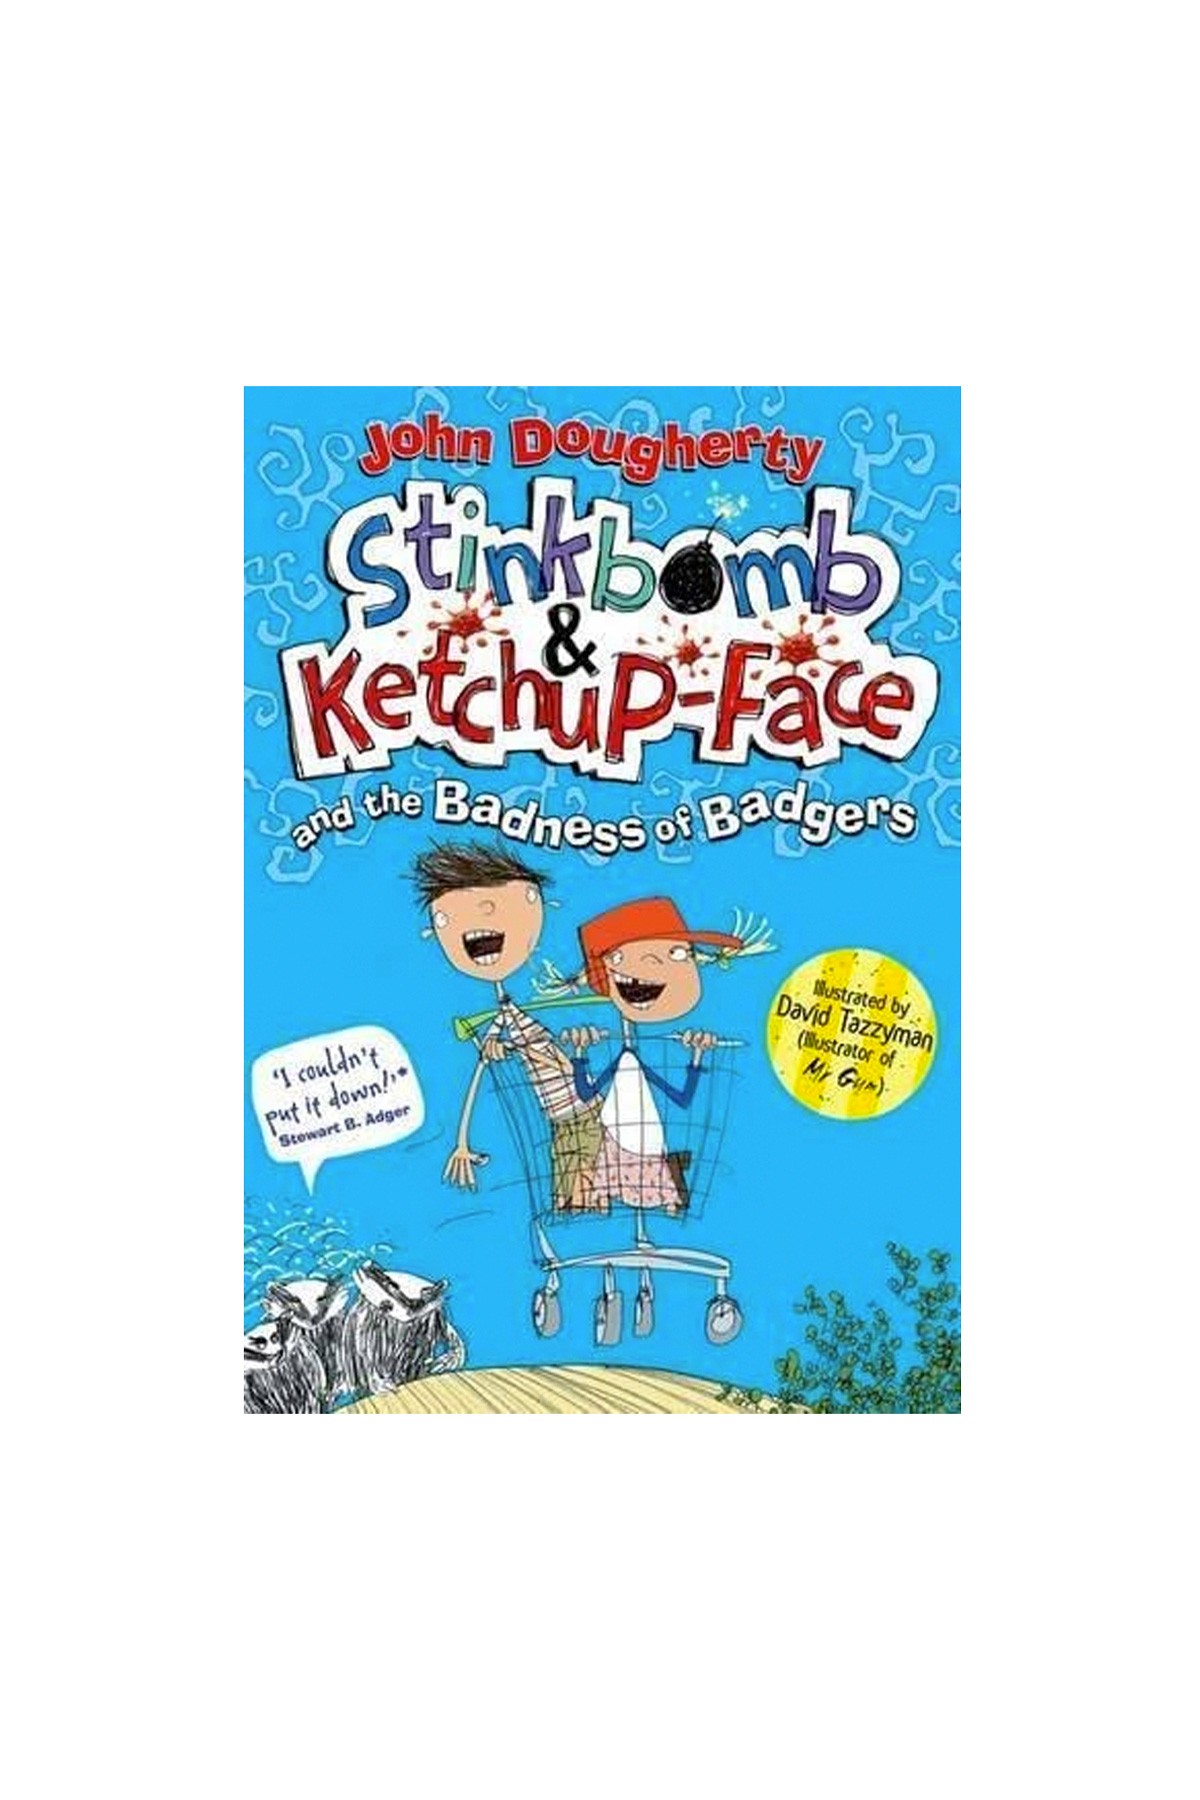 Oxford Childrens Book - Stinkbomb & Ketchup-Face And The Badness Of Badgers